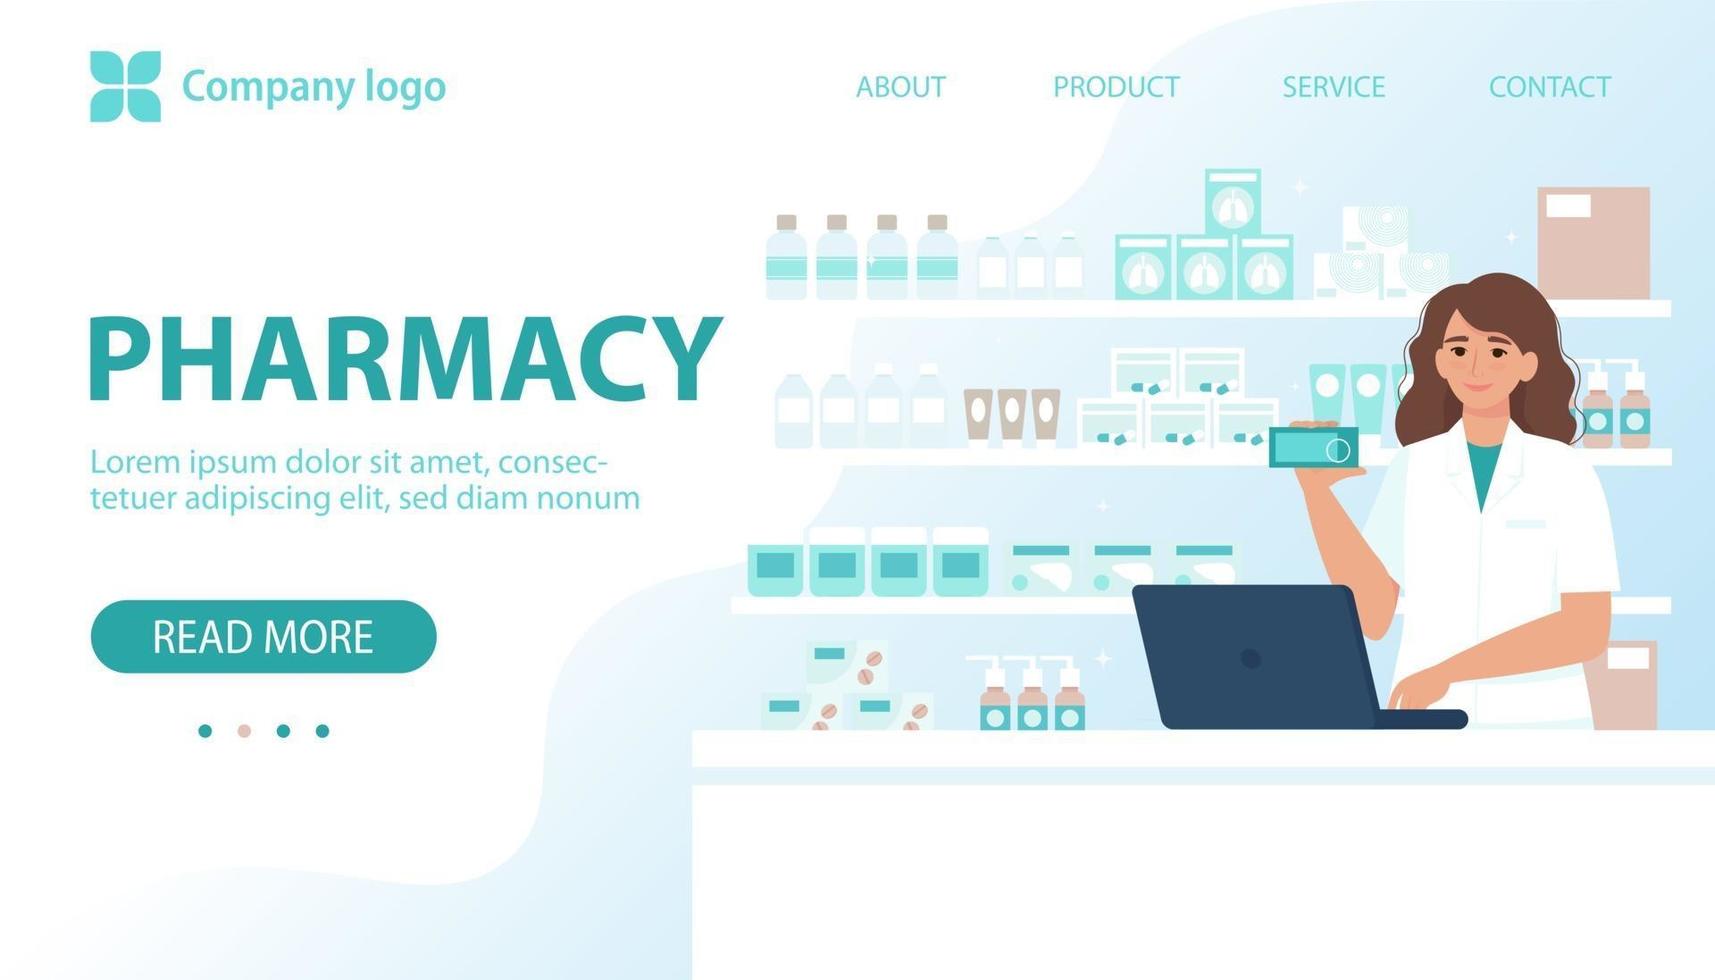 Pharmacy concept. Female pharmacist behind the counter in a drugstore selling medicine. Vector illustration in flat style for banner, landing page, web page